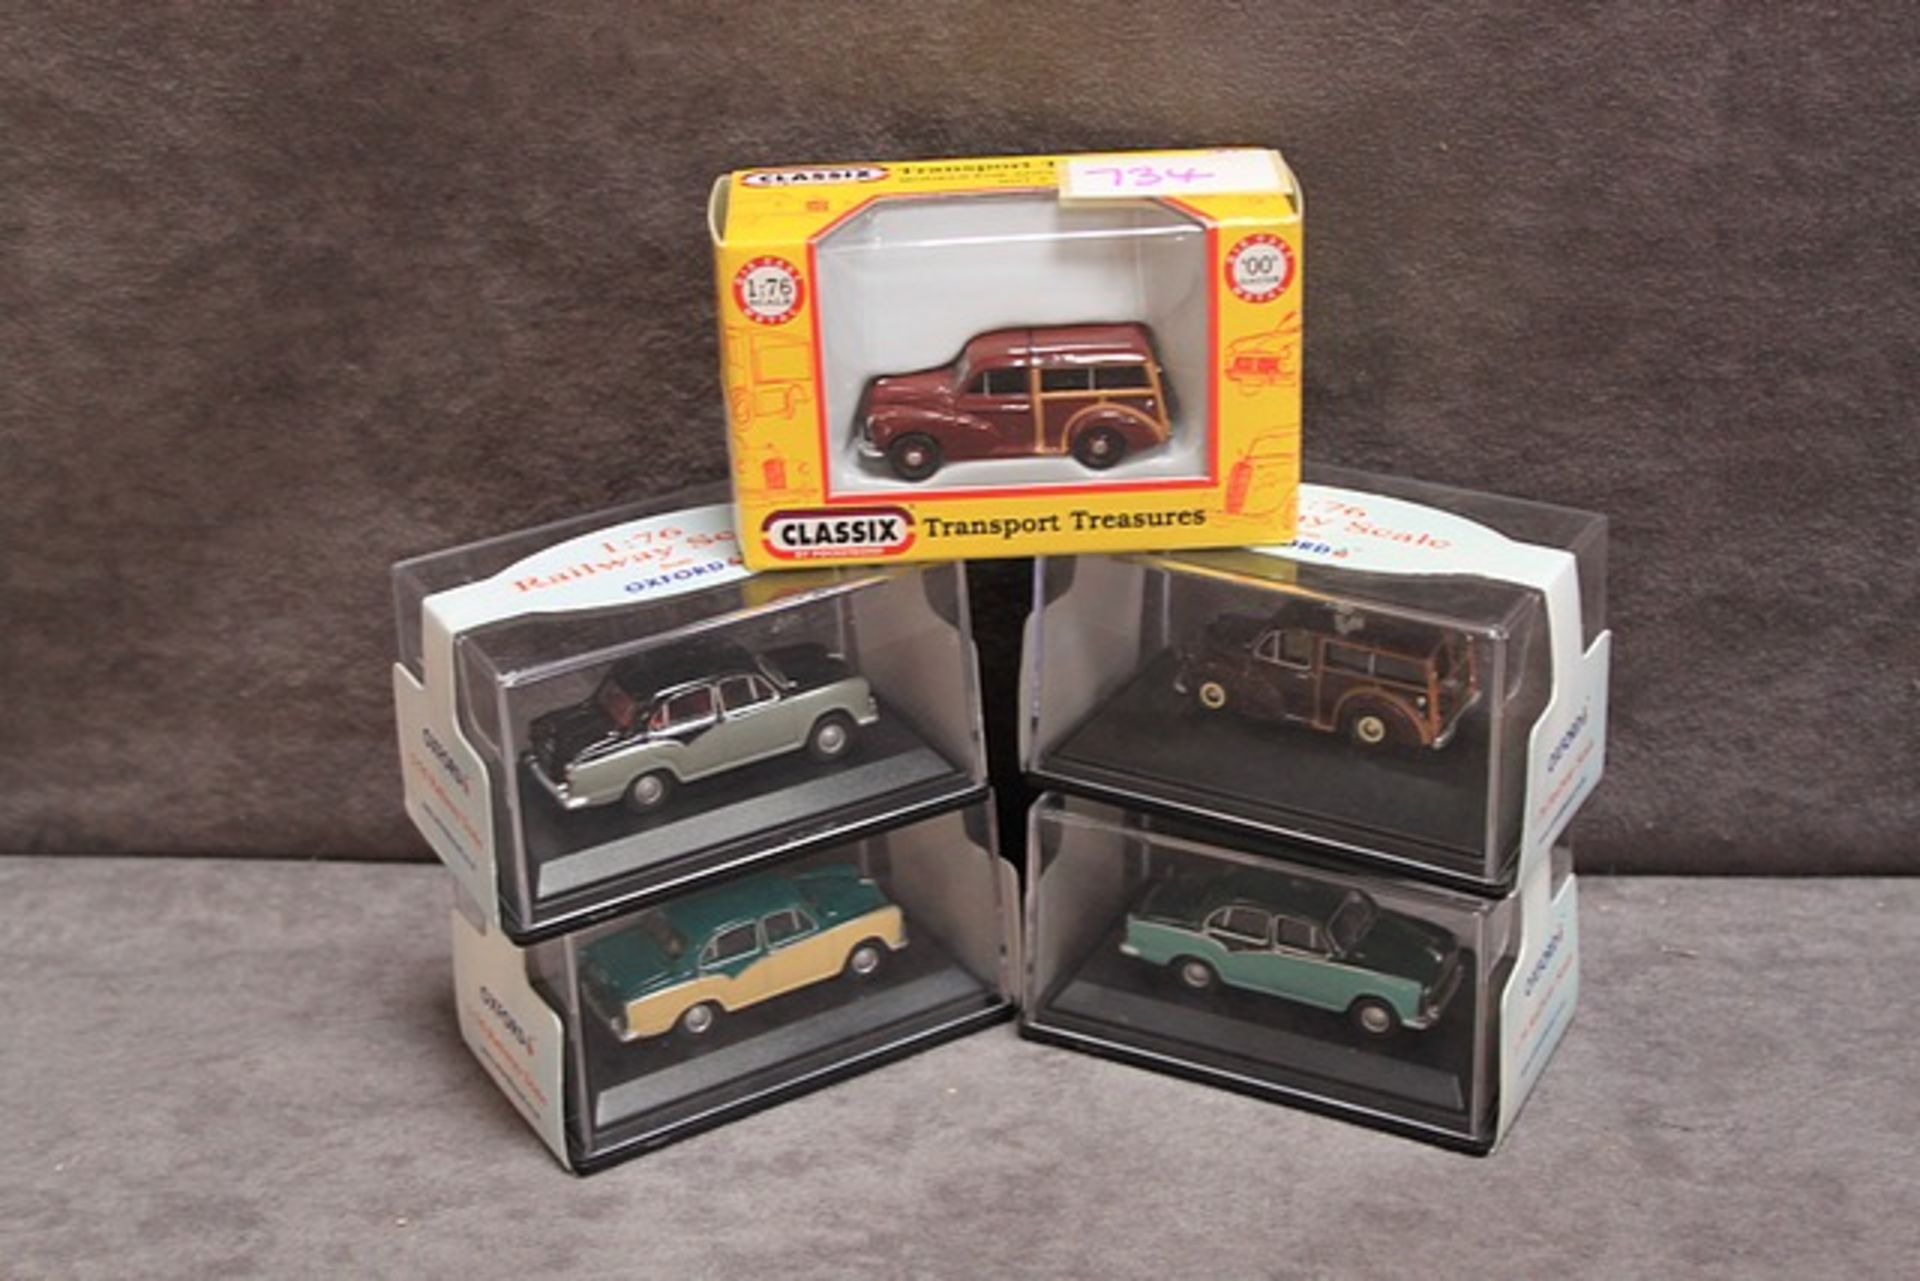 5x 1/76 Railway scale diecast vehicles comprising of 4x Oxford& 1x Classix, comprising of; #